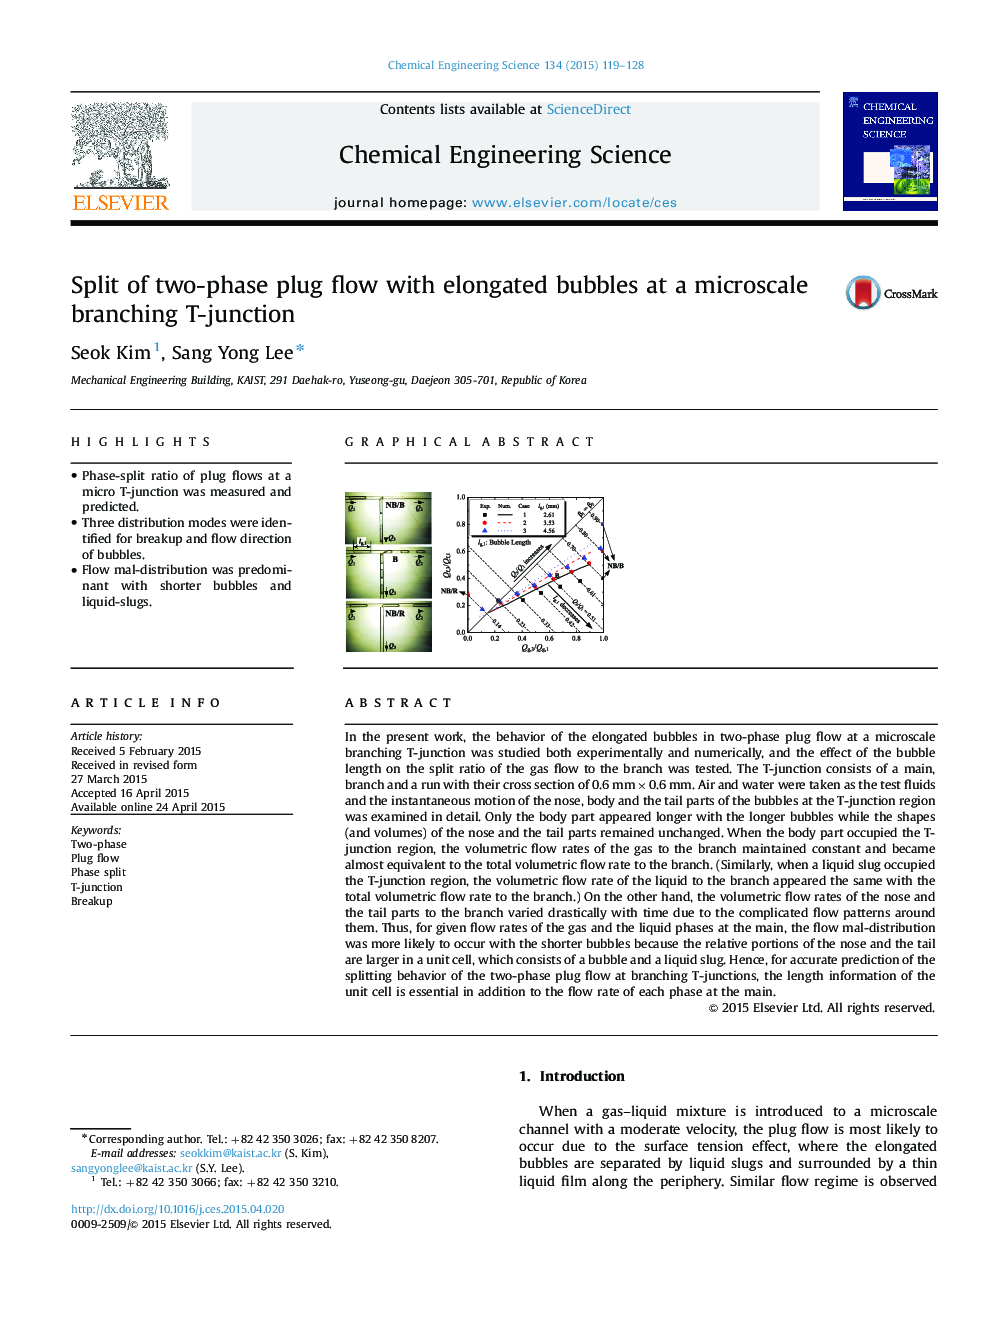 Split of two-phase plug flow with elongated bubbles at a microscale branching T-junction